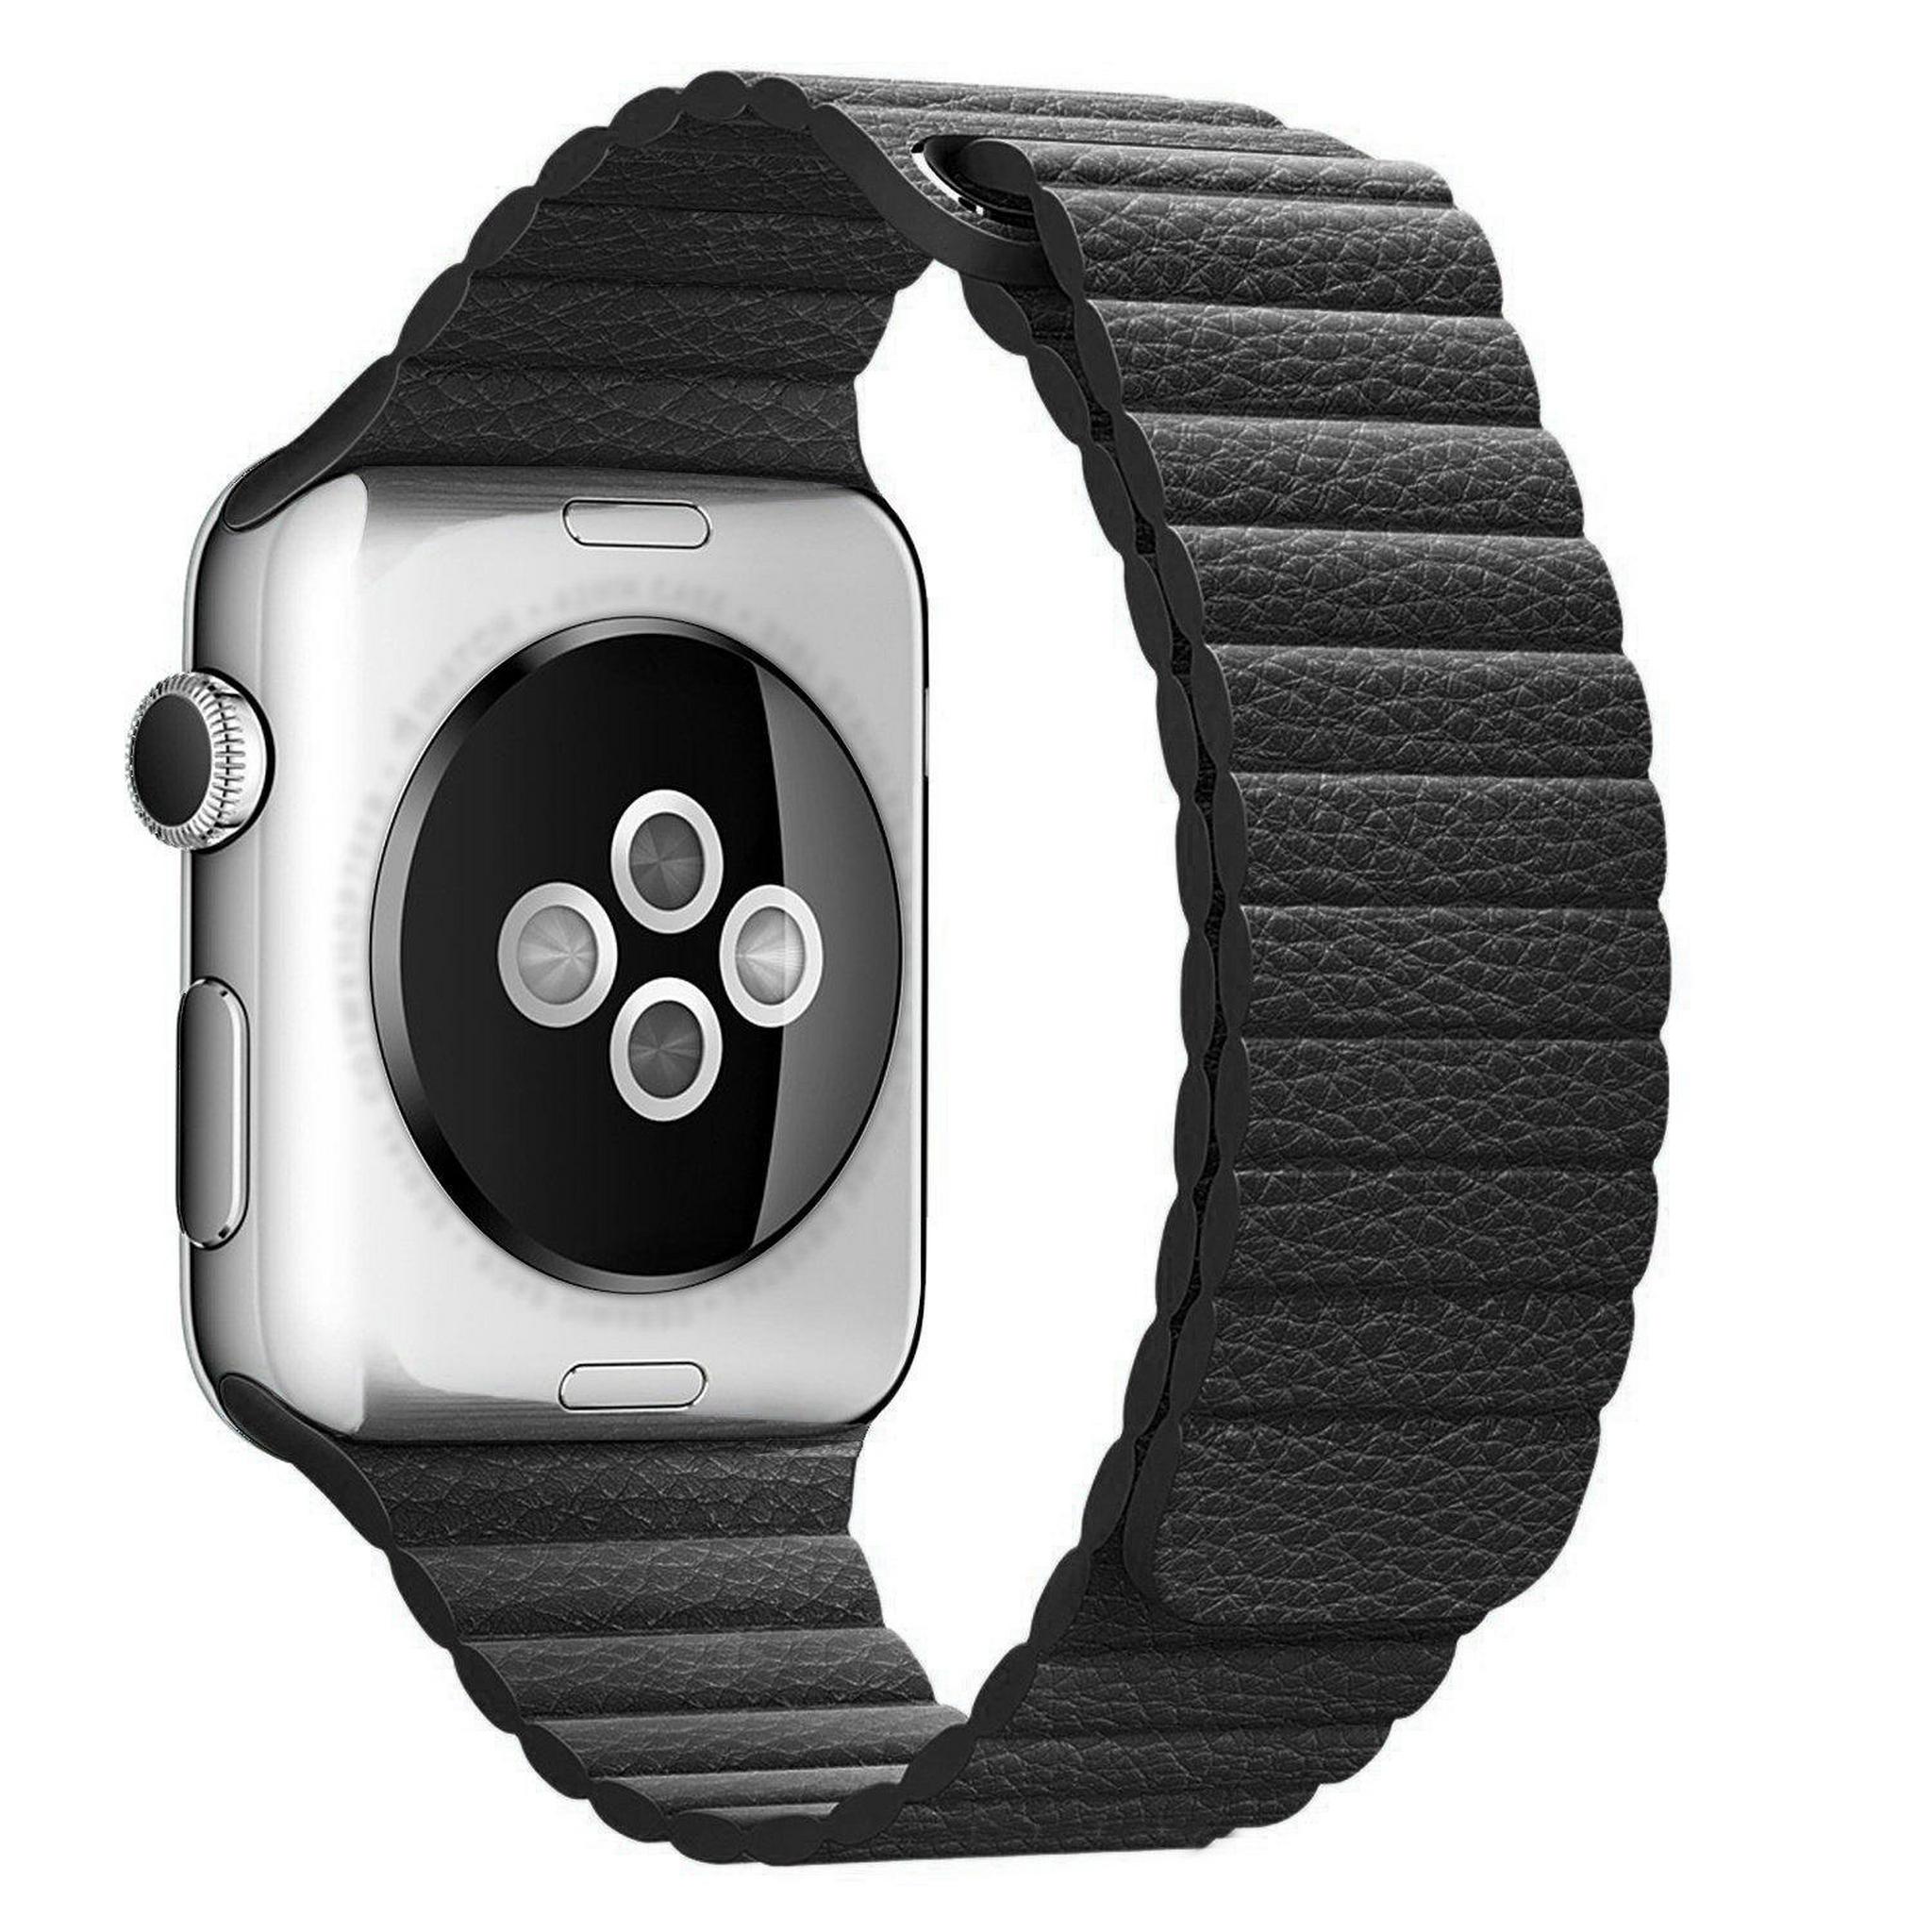 EQ Magnetic Leather Strap For Apple Watch 41mm - Black